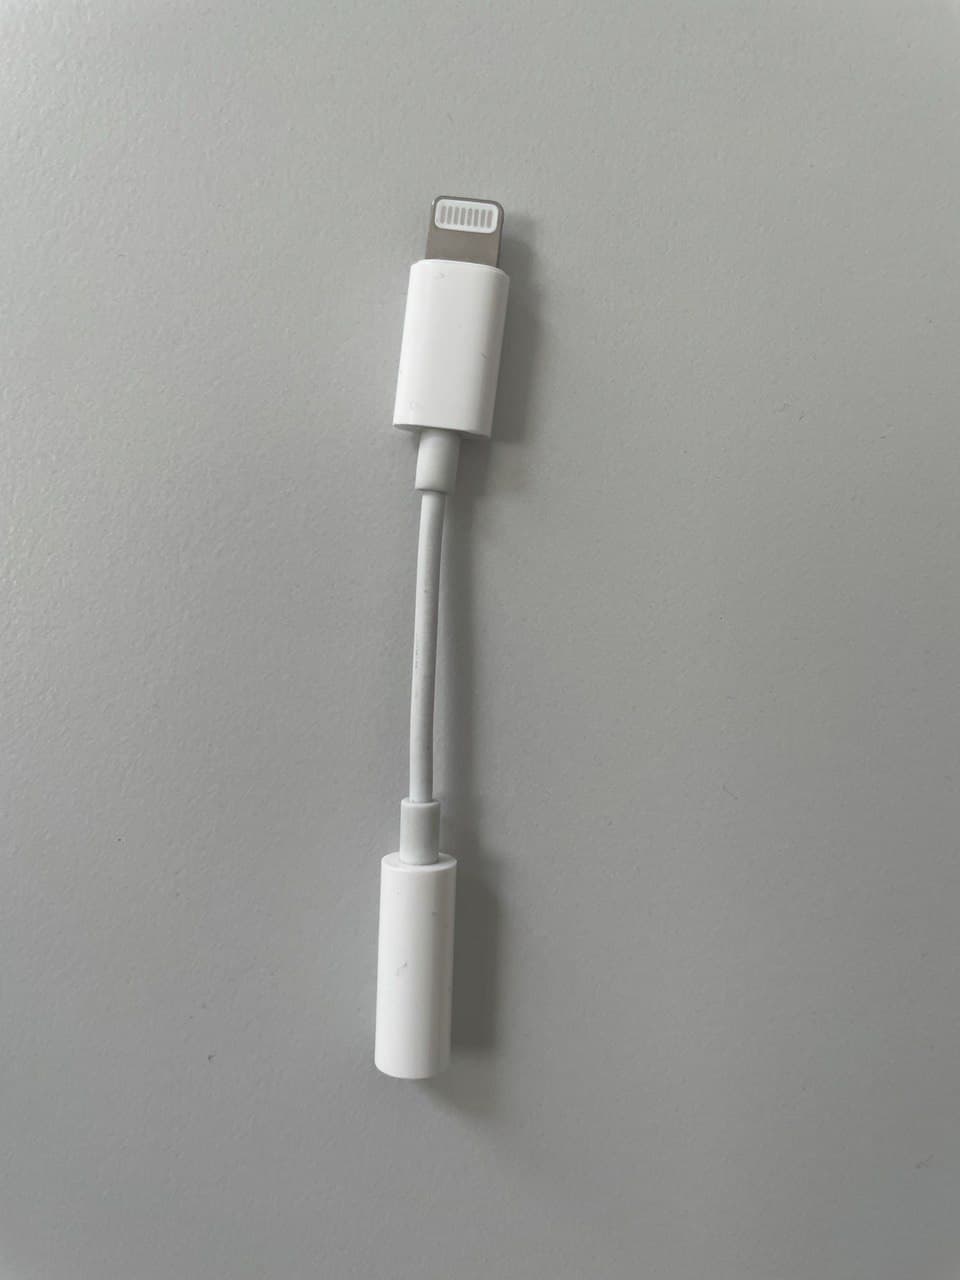 My lightning to 3.5mm adapter is not work… - Apple Community